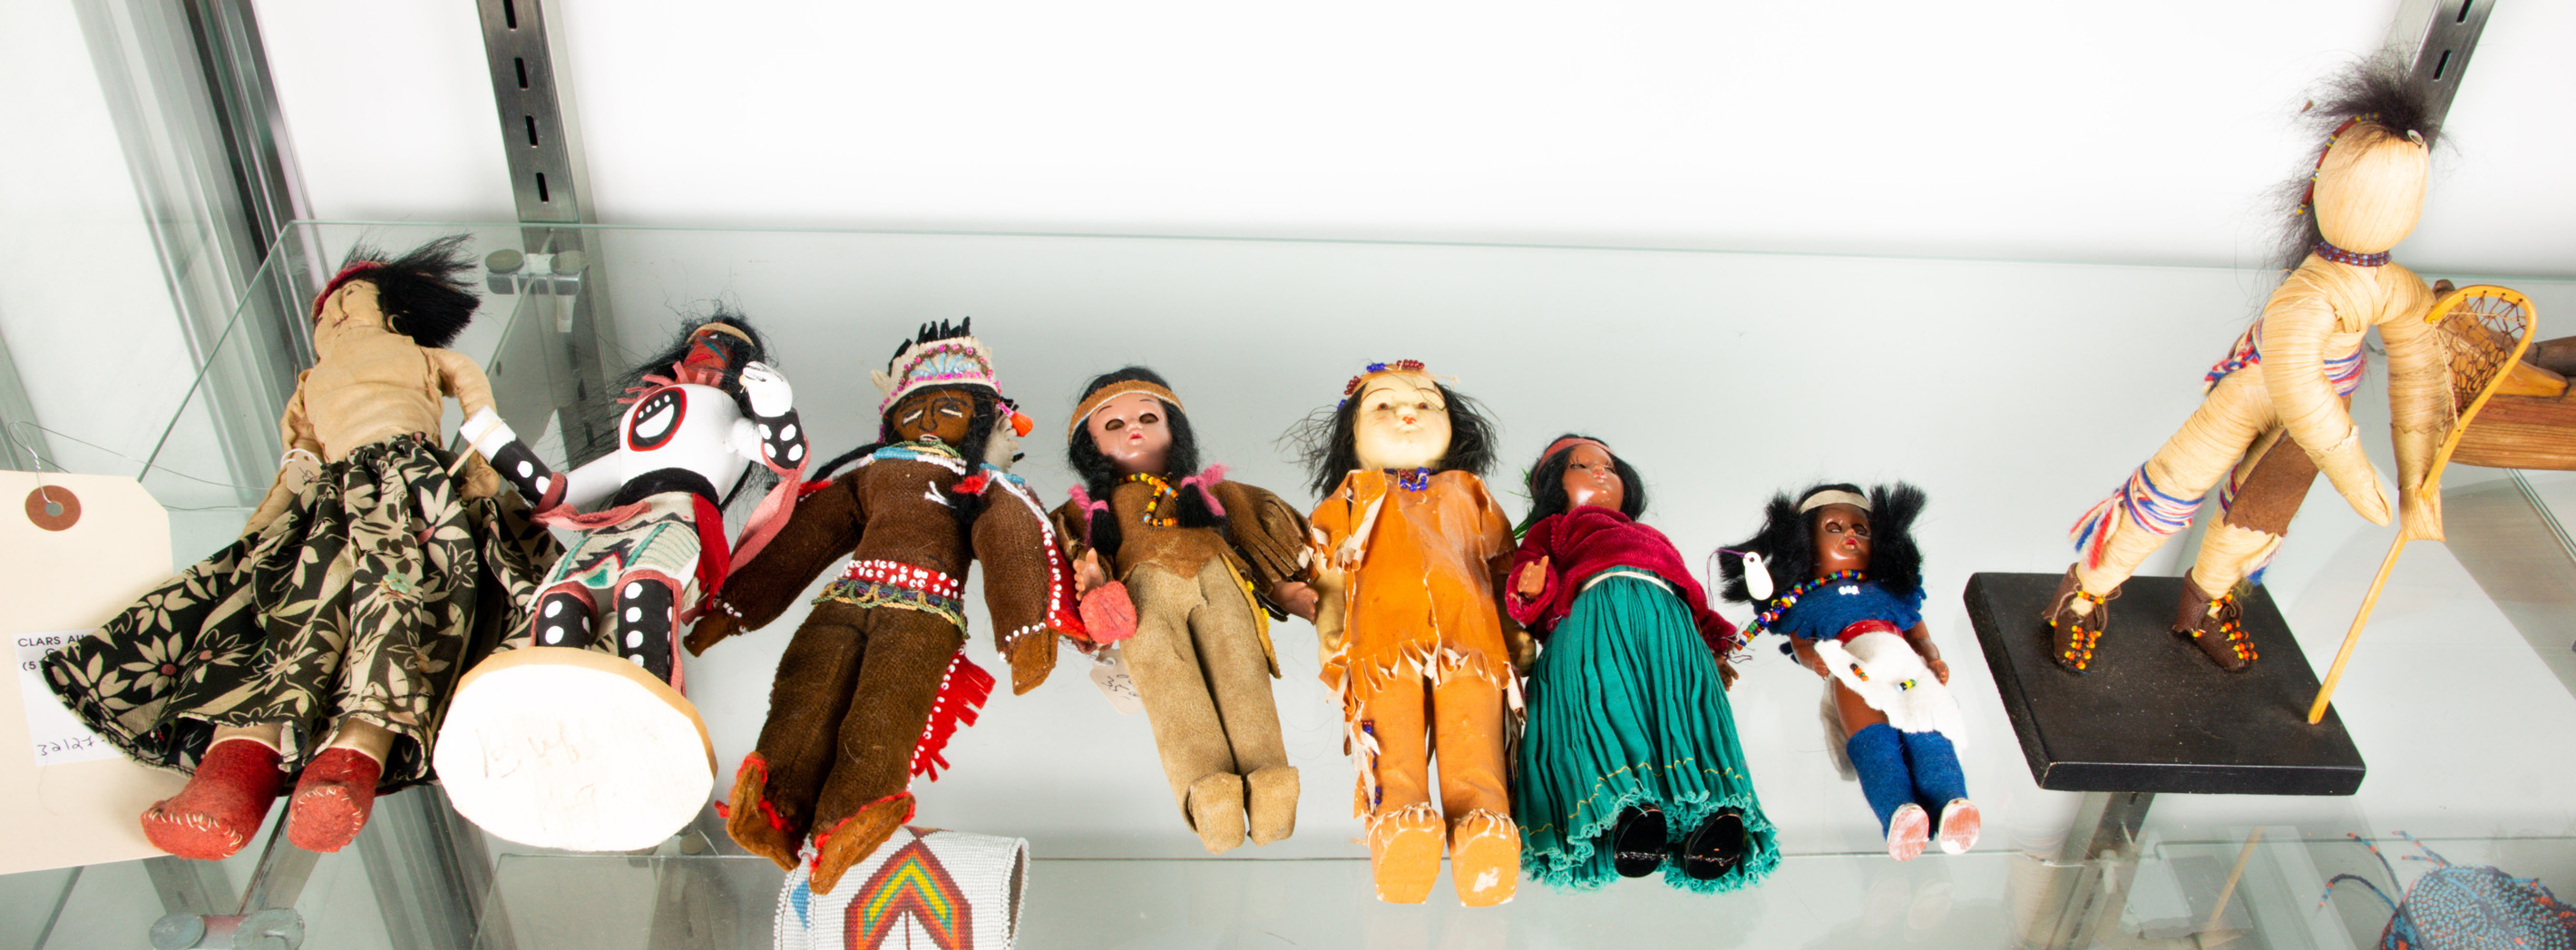 (LOT OF 8) NATIVE AMERICAN DOLL